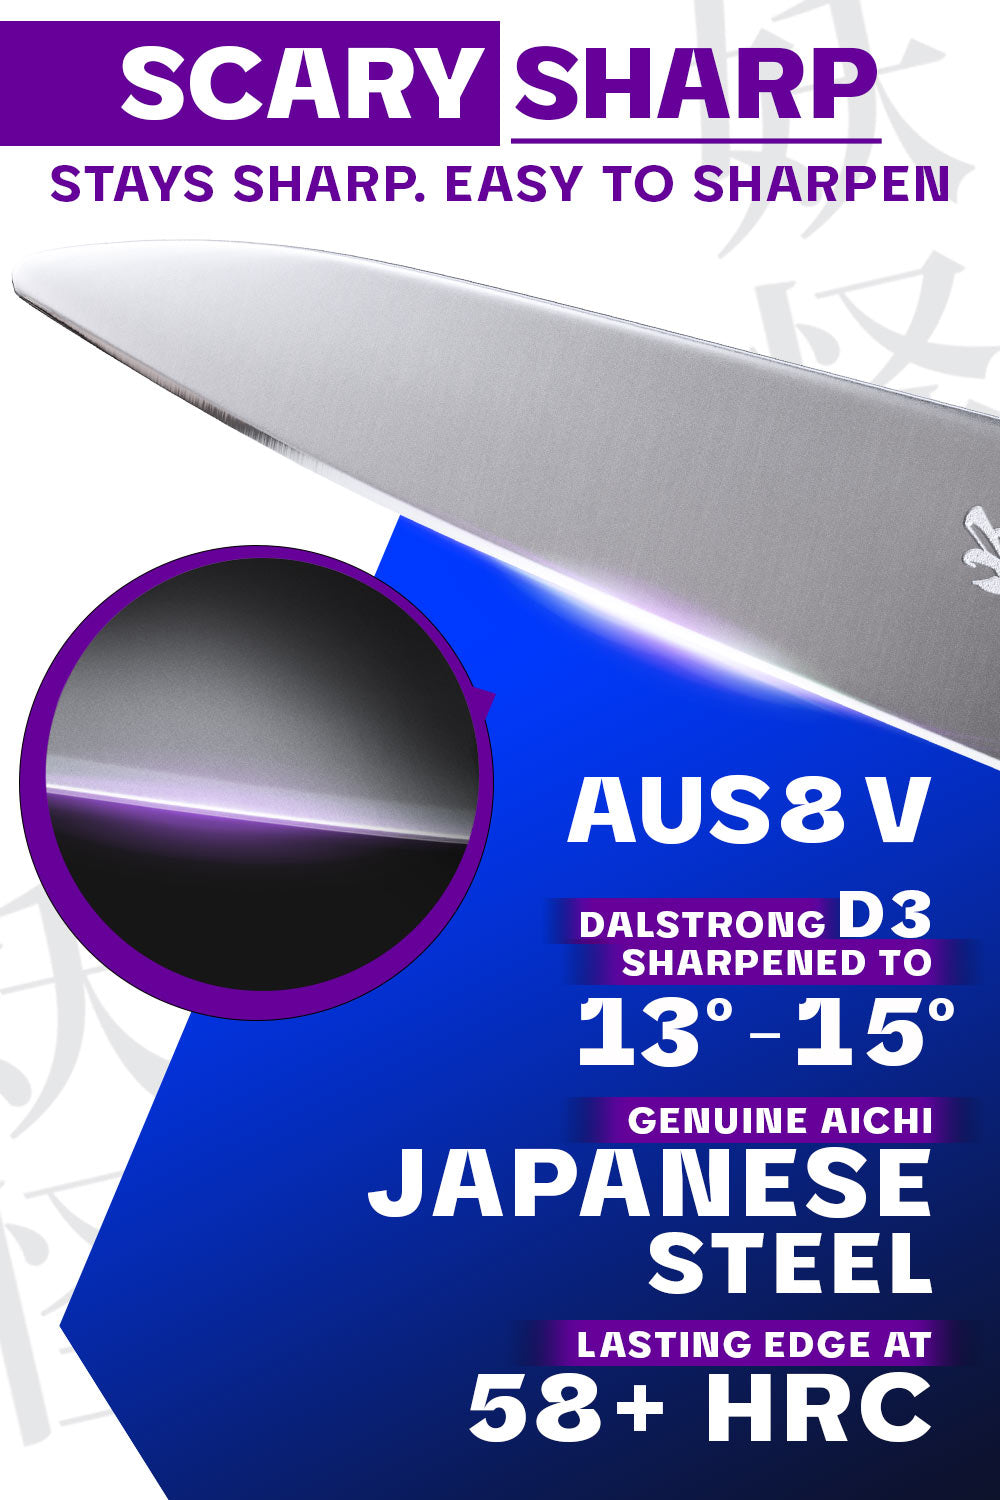 Dalstrong phantom series 4 inch paring knife with pakka wood handle featuring it's razor sharp japanese steel blade.